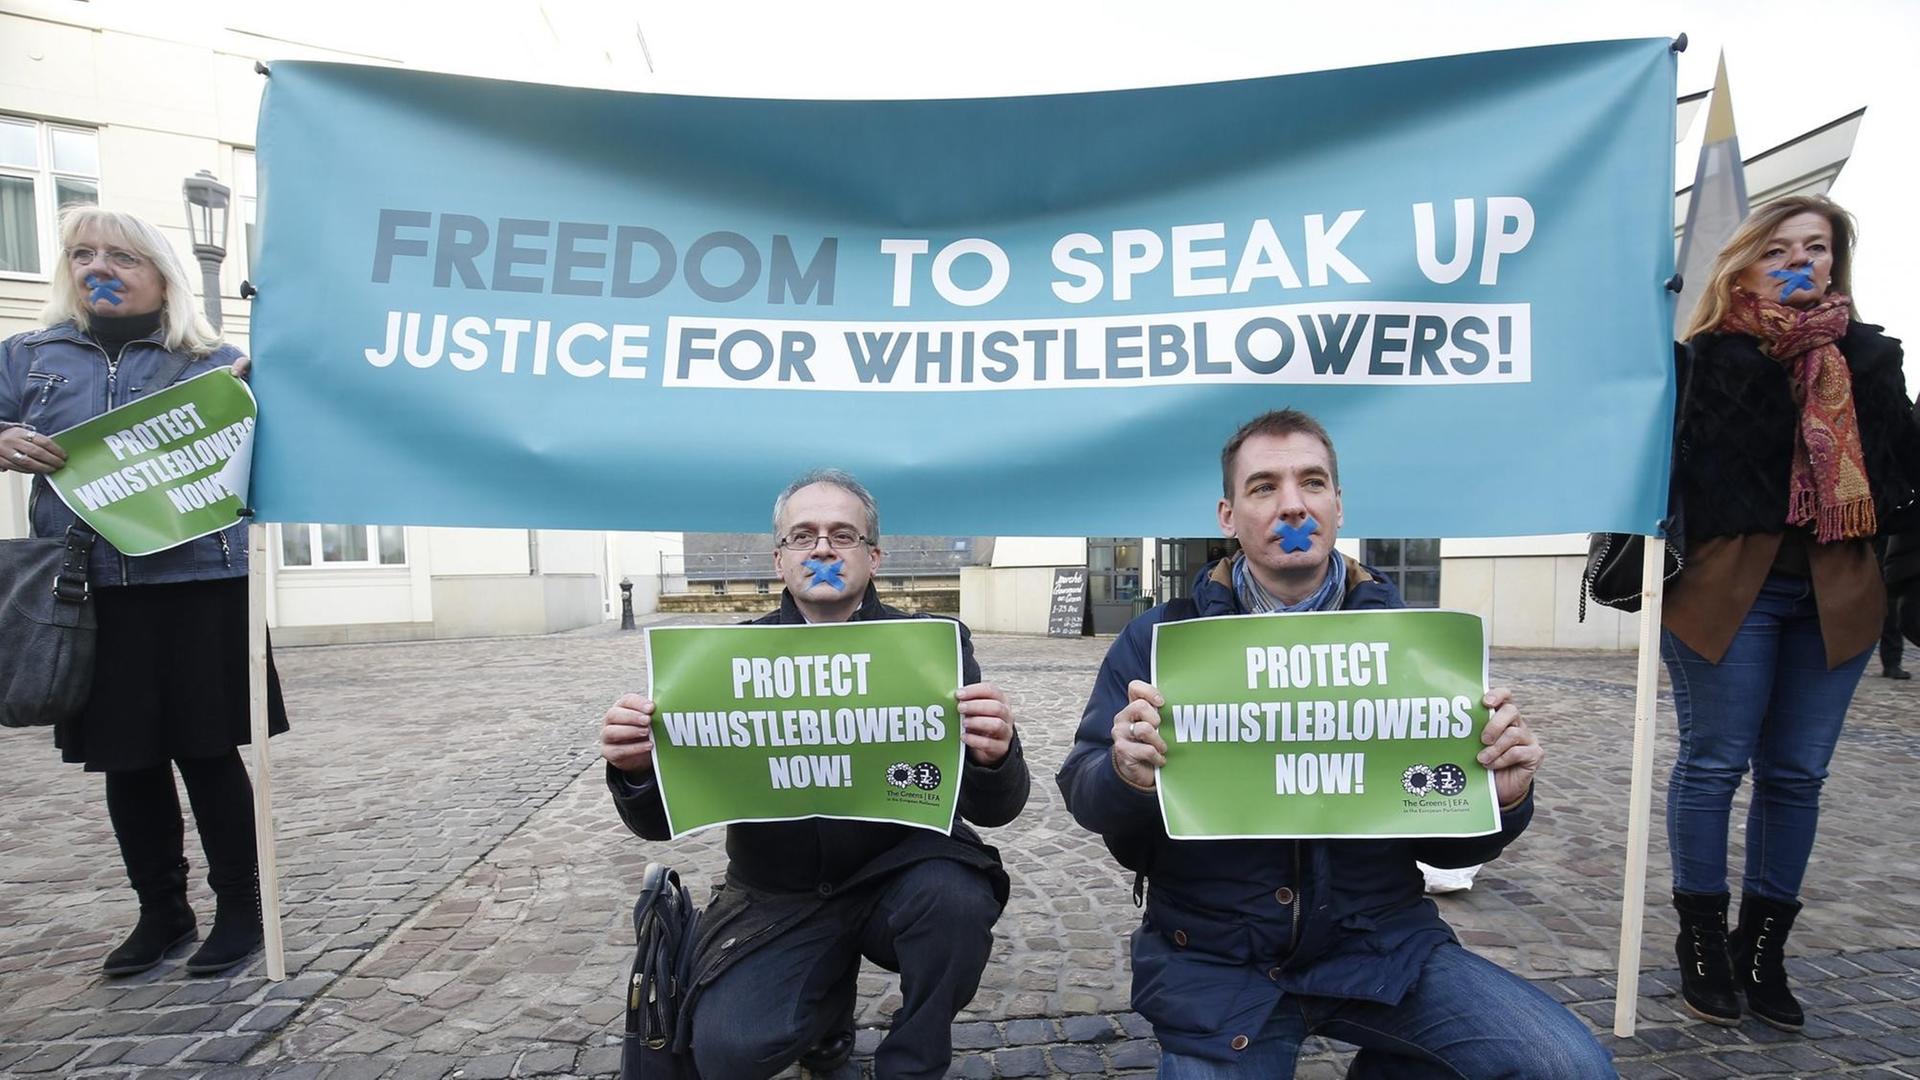 People hold placards 'Freedom to Speak Up, Justice for Whistleblowers!' and 'Protect Whistleblowers Now' during a demonstration at the start of the so-called LuxLeaks Whistleblower appeal trial, in the criminal court in Luxembourg, 12 December 2016. Three men, two former employees of accounting firm PricewaterhouseCoopers (PwC) Antoine Deltour and Raphael Halet and a journalist Edouard Perrin were on trial for leaking thousands of confidential documents revealing corporate tax deals. The court on 29 June 2016 handed suspended sentences to Antoine Deltour and Raphael Halet, while journalist Edouard Perrin was acquitted of all charges.